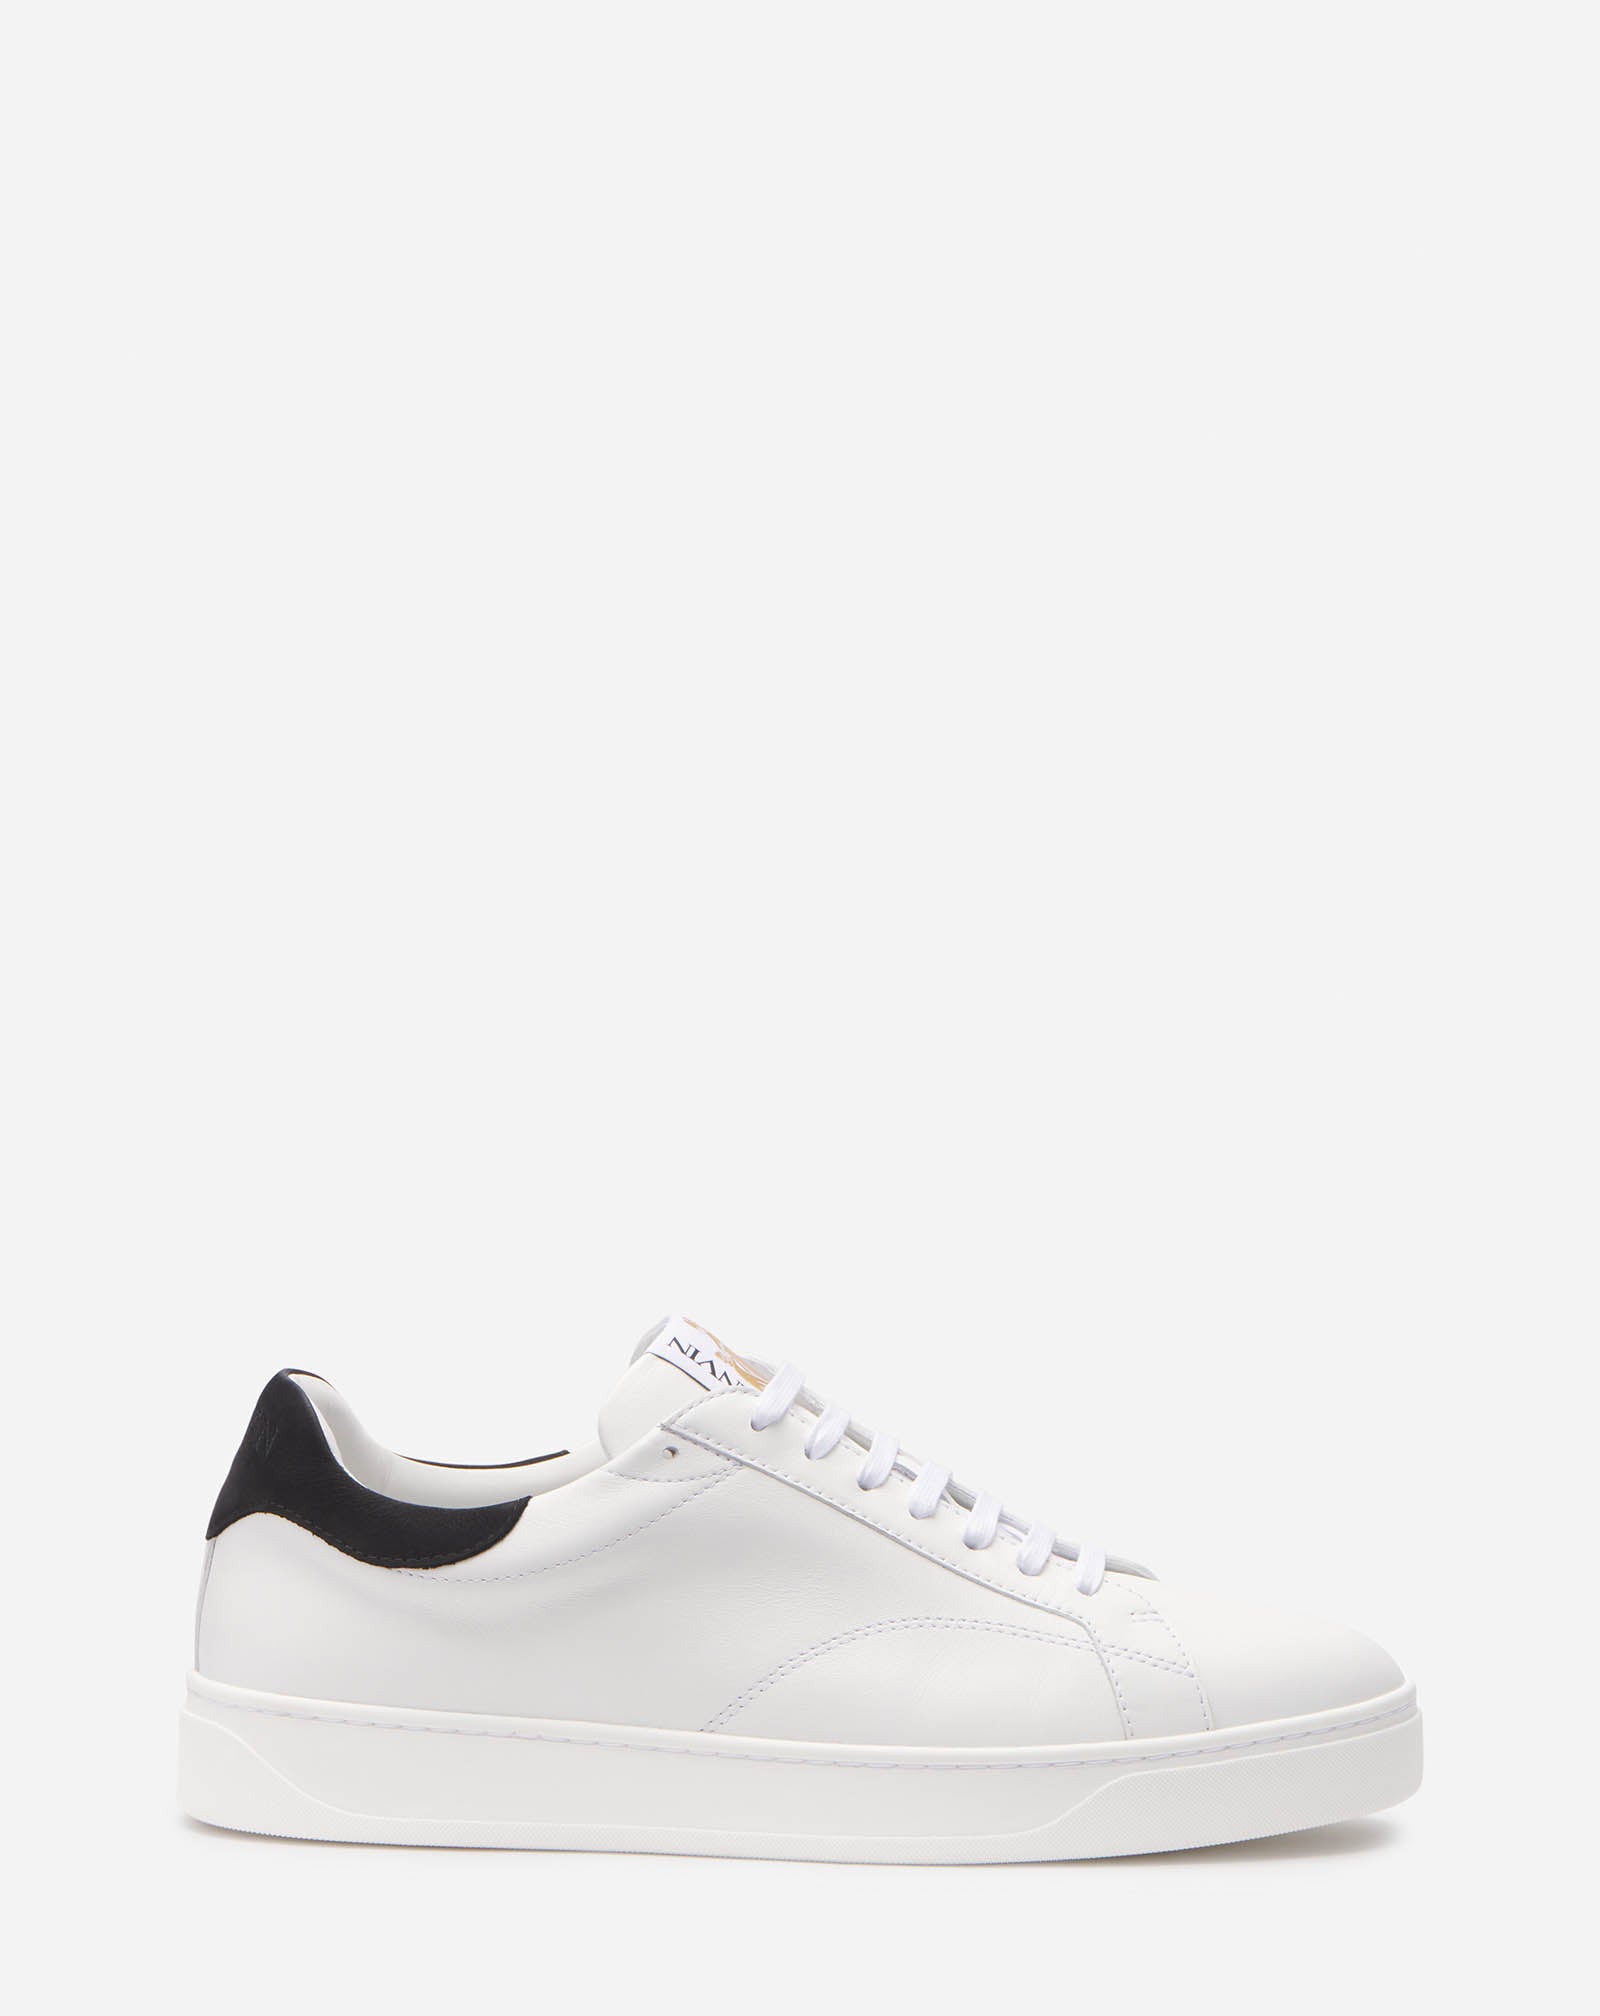 LEATHER DDB0 SNEAKERS, WHITE/BLACK